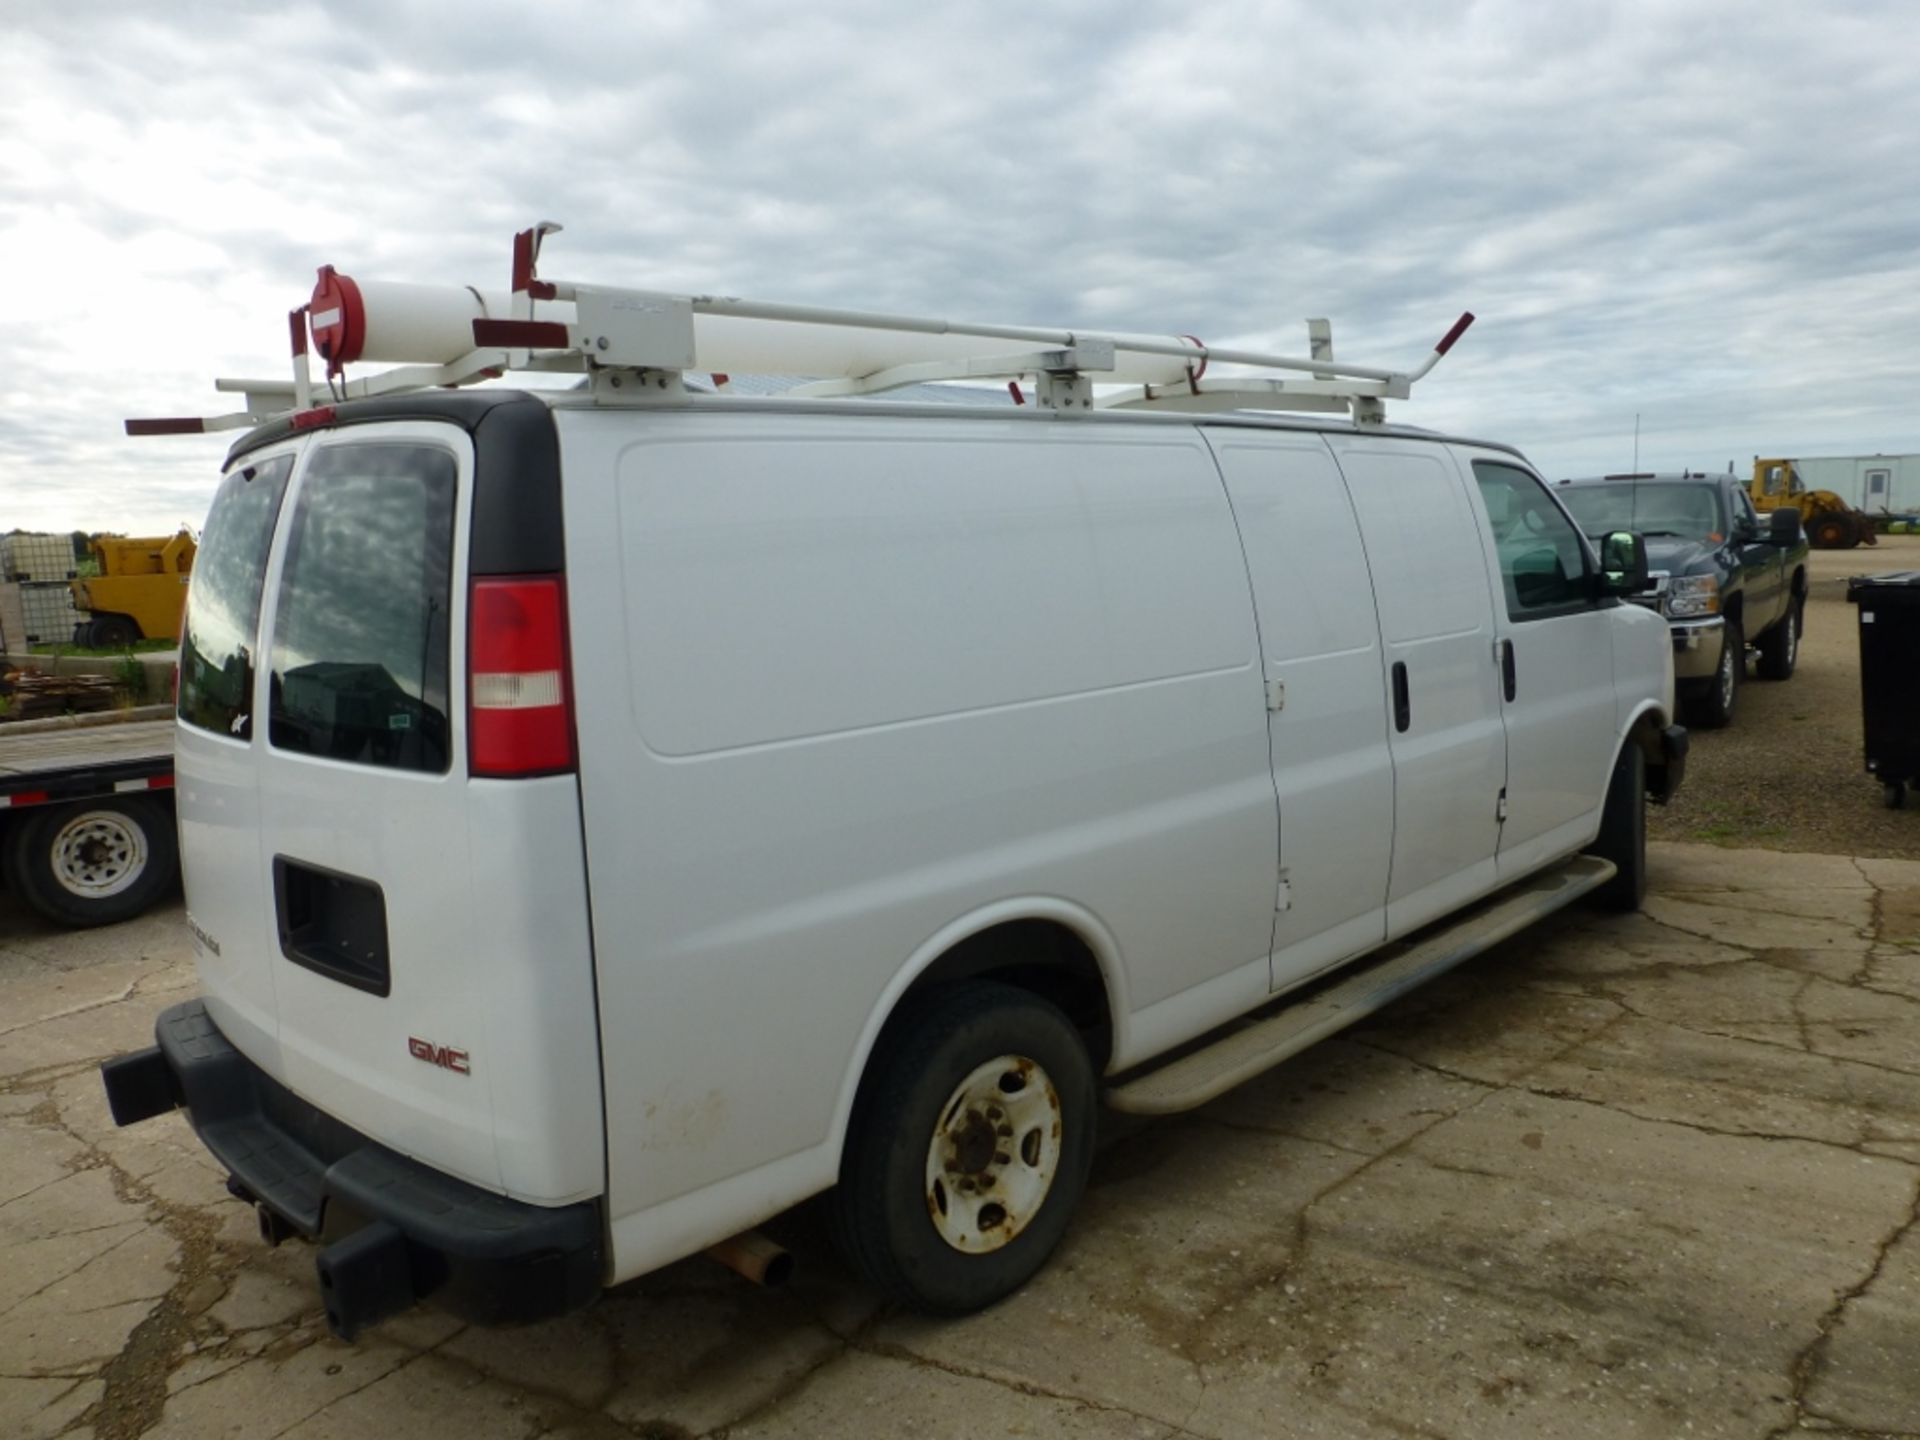 2008 GMC Cargo van, with shelf drawer units, automatic, a.c., manual windows, 254,605 unverified - Image 17 of 22